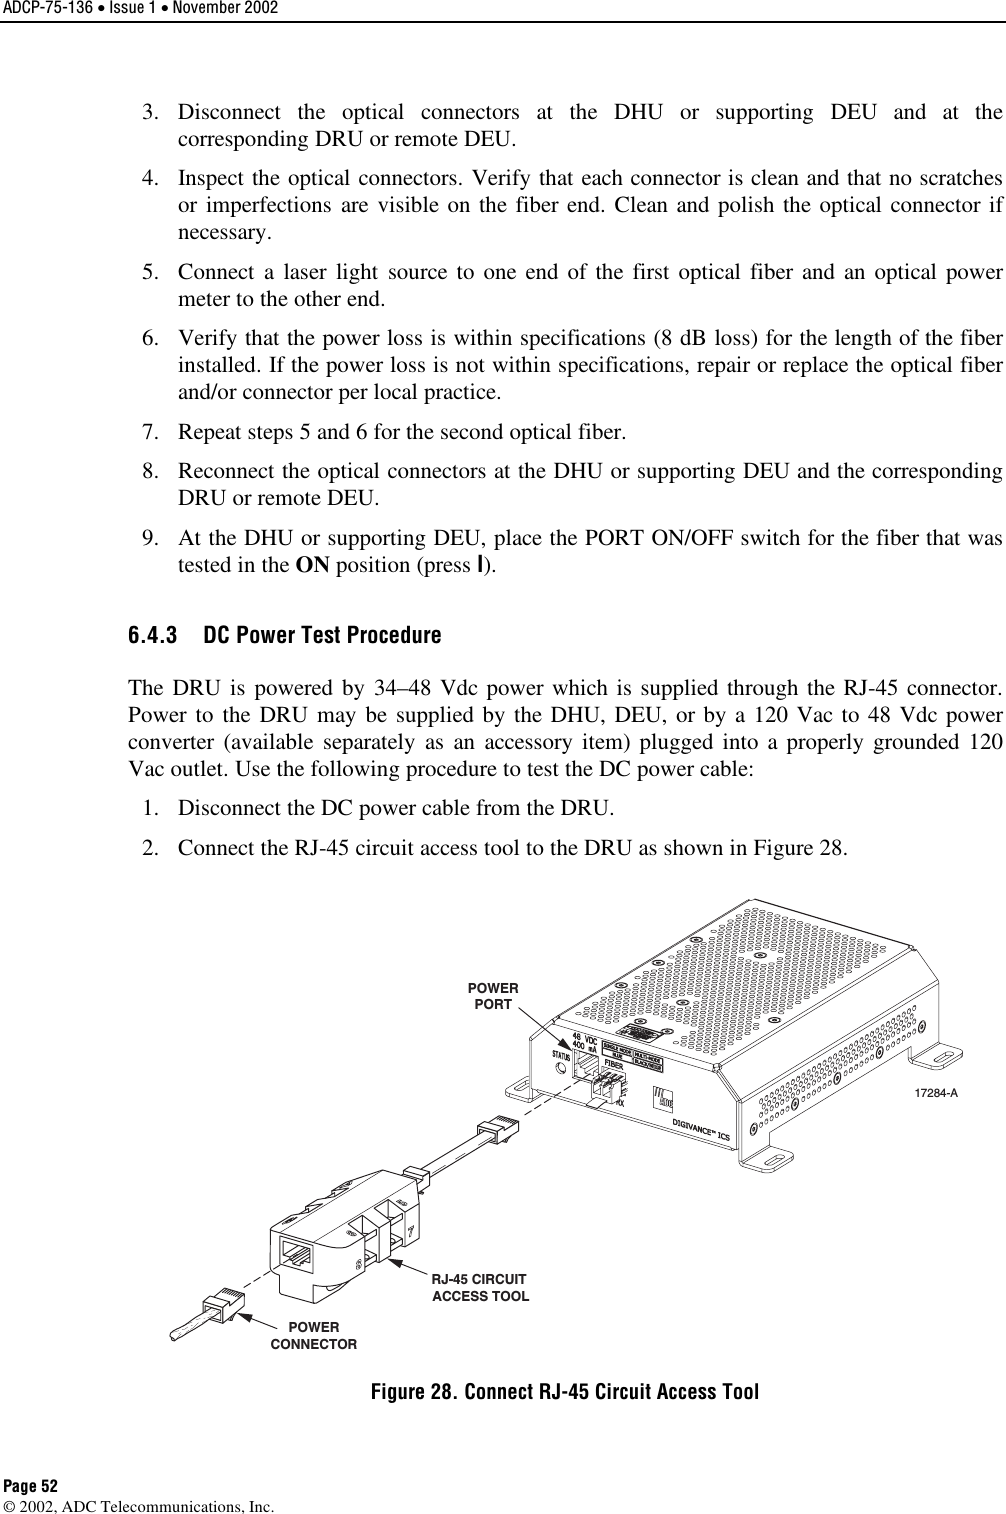 ADCP-75-136 • Issue 1 • November 2002 Page 52 ©2002, ADC Telecommunications, Inc.3. Disconnect the optical connectors at the DHU or supporting DEU and at thecorresponding DRU or remote DEU.4. Inspect the optical connectors. Verify that each connector is clean and that no scratchesor imperfections are visible on the fiber end. Clean and polish the optical connector ifnecessary.5. Connect a laser light source to one end of the first optical fiber and an optical powermeter to the other end.6. Verify that the power loss is within specifications (8 dB loss) for the length of the fiberinstalled. If the power loss is not within specifications, repair or replace the optical fiberand/or connector per local practice.7. Repeat steps 5and 6for the second optical fiber.8. Reconnect the optical connectors at the DHU or supporting DEU and the correspondingDRU or remote DEU.9. At the DHU or supporting DEU, place the PORT ON/OFF switch for the fiber that wastested in the ON position (press I).6.4.3  DC Power Test Procedure The DRU is powered by 34–48 Vdc power which is supplied through the RJ-45 connector.Power to the DRU may be supplied by the DHU, DEU, or by a 120 Vac to 48 Vdc powerconverter (available separately as an accessory item) plugged into a properly grounded 120Vac outlet. Use the following procedure to test the DC power cable:1. Disconnect the DC power cable from the DRU.2. Connect the RJ-45 circuit access tool to the DRU as shown in Figure 28.POWERPORTPOWERCONNECTORRJ-45 CIRCUIT ACCESS TOOL17284-AFigure 28. Connect RJ-45 Circuit Access Tool 